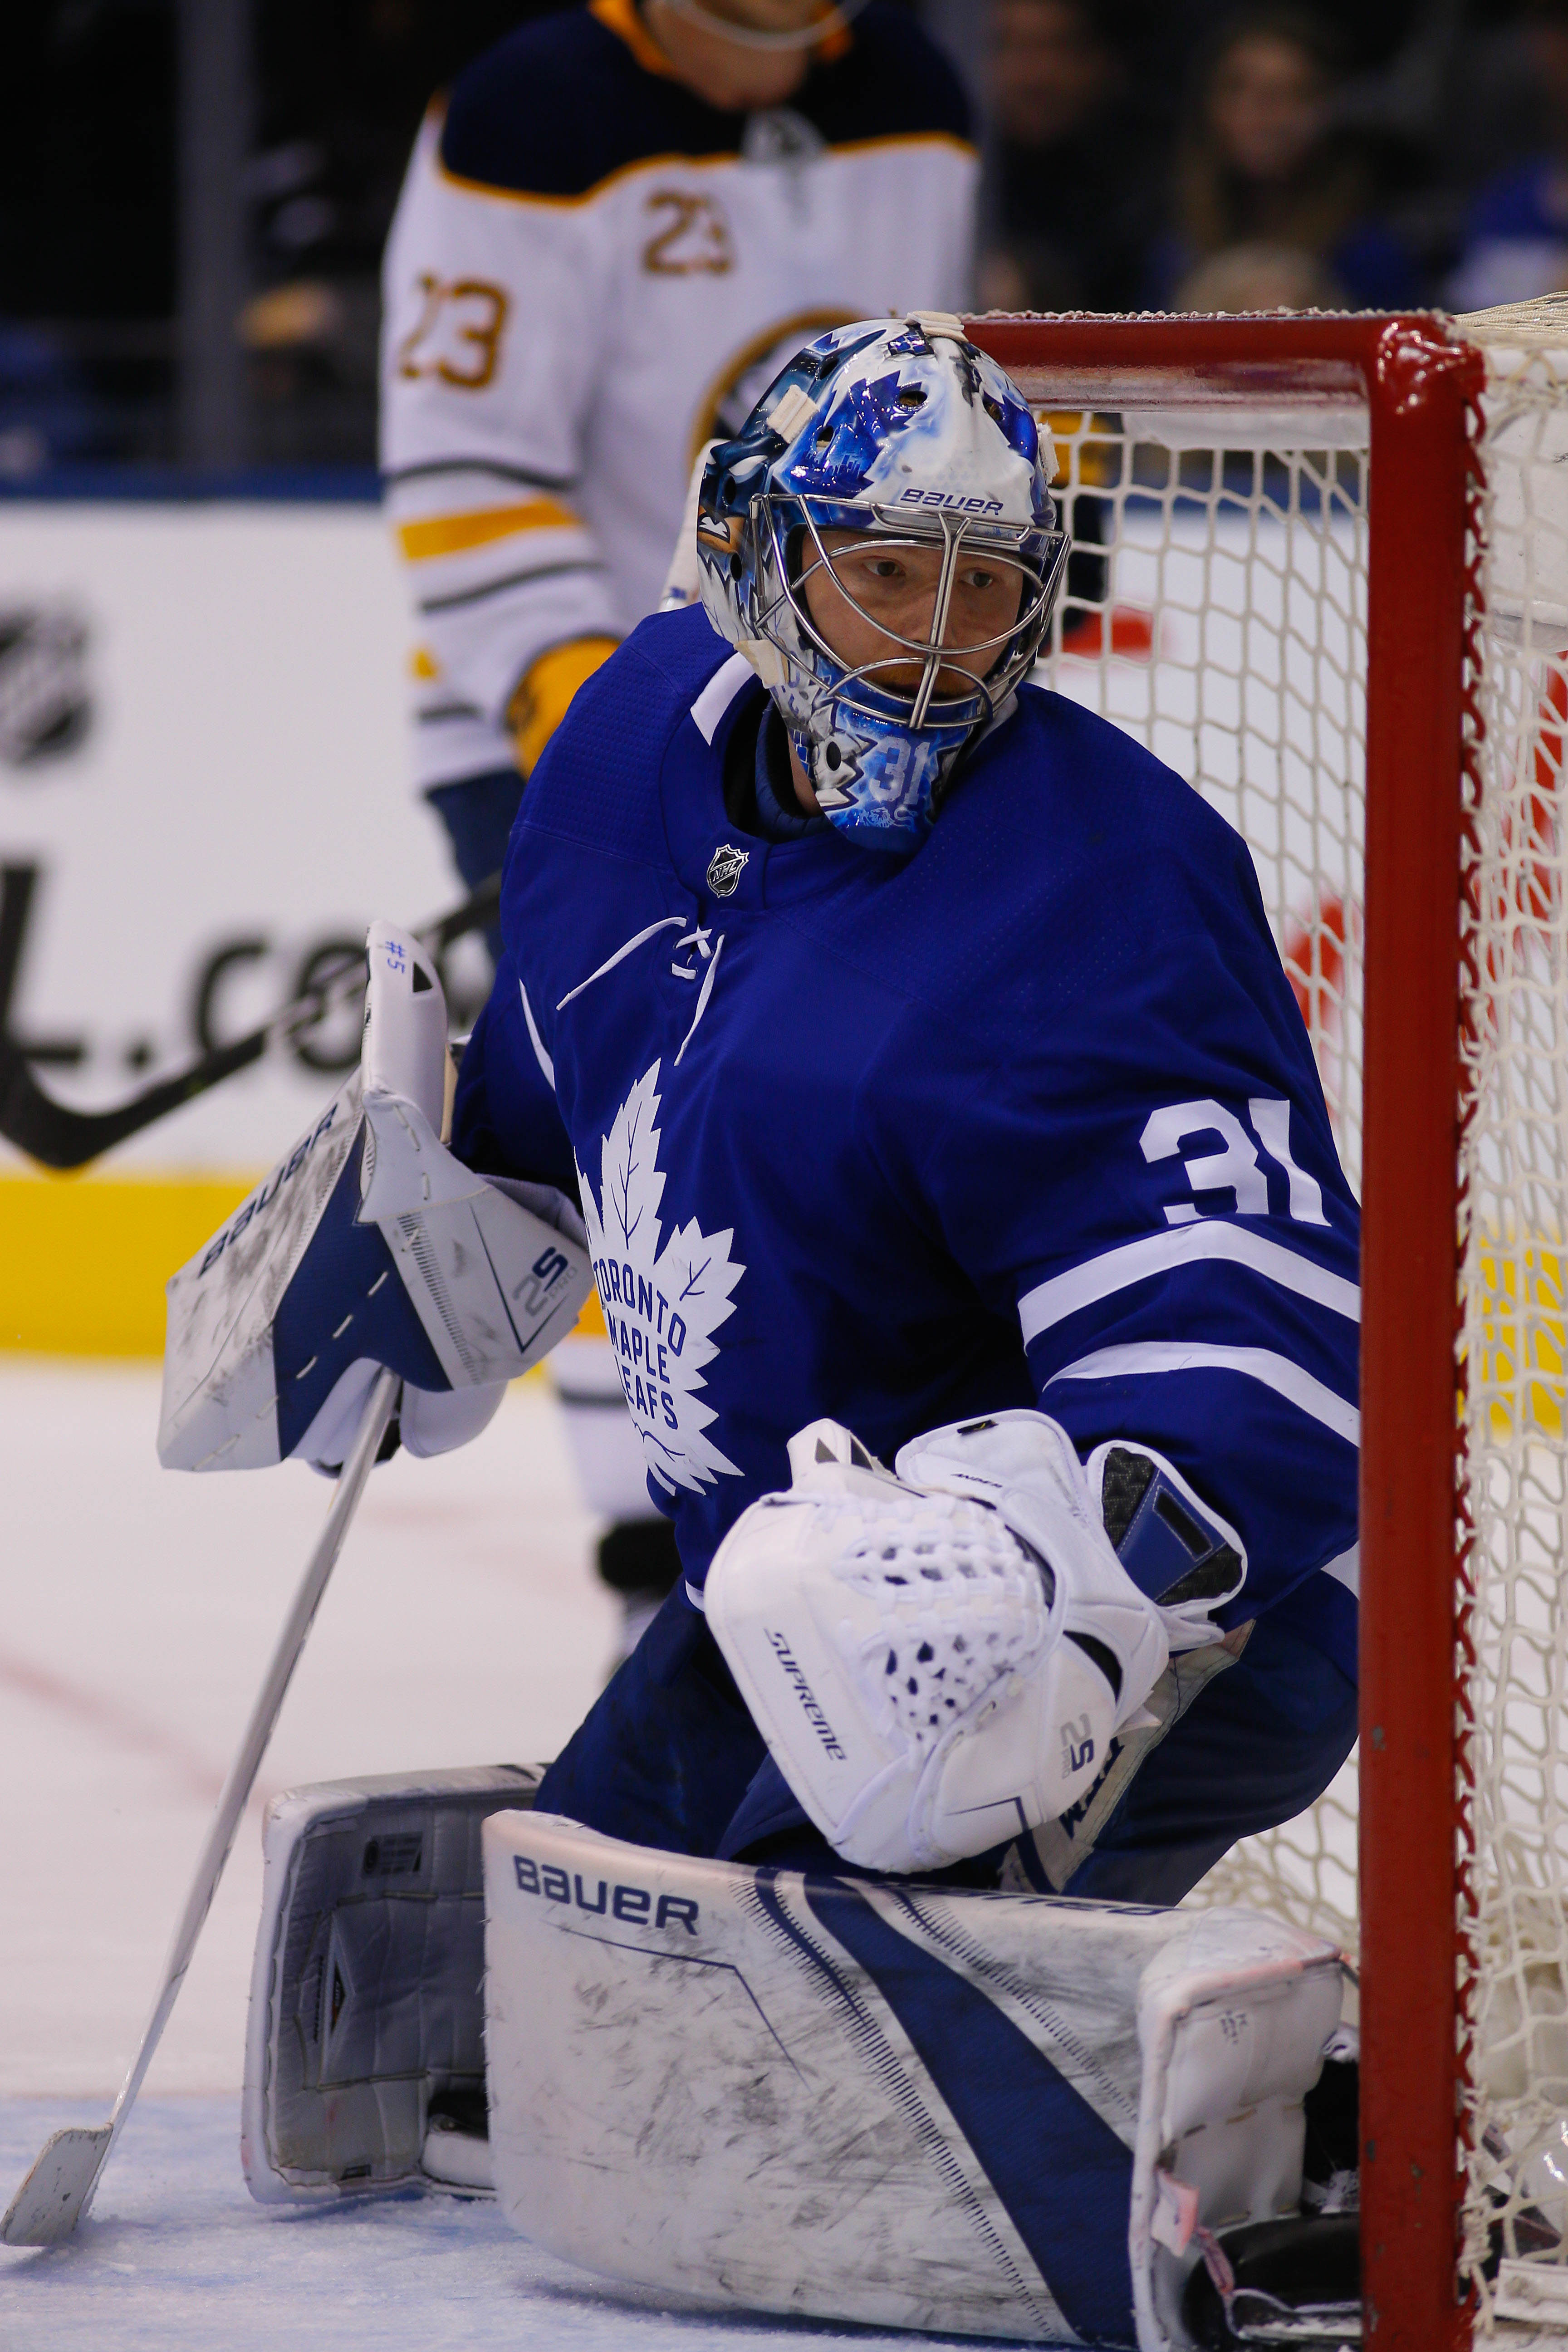 No Mrazek, no problem: Woll proving to be a solid option for Maple Leafs  now and in the future